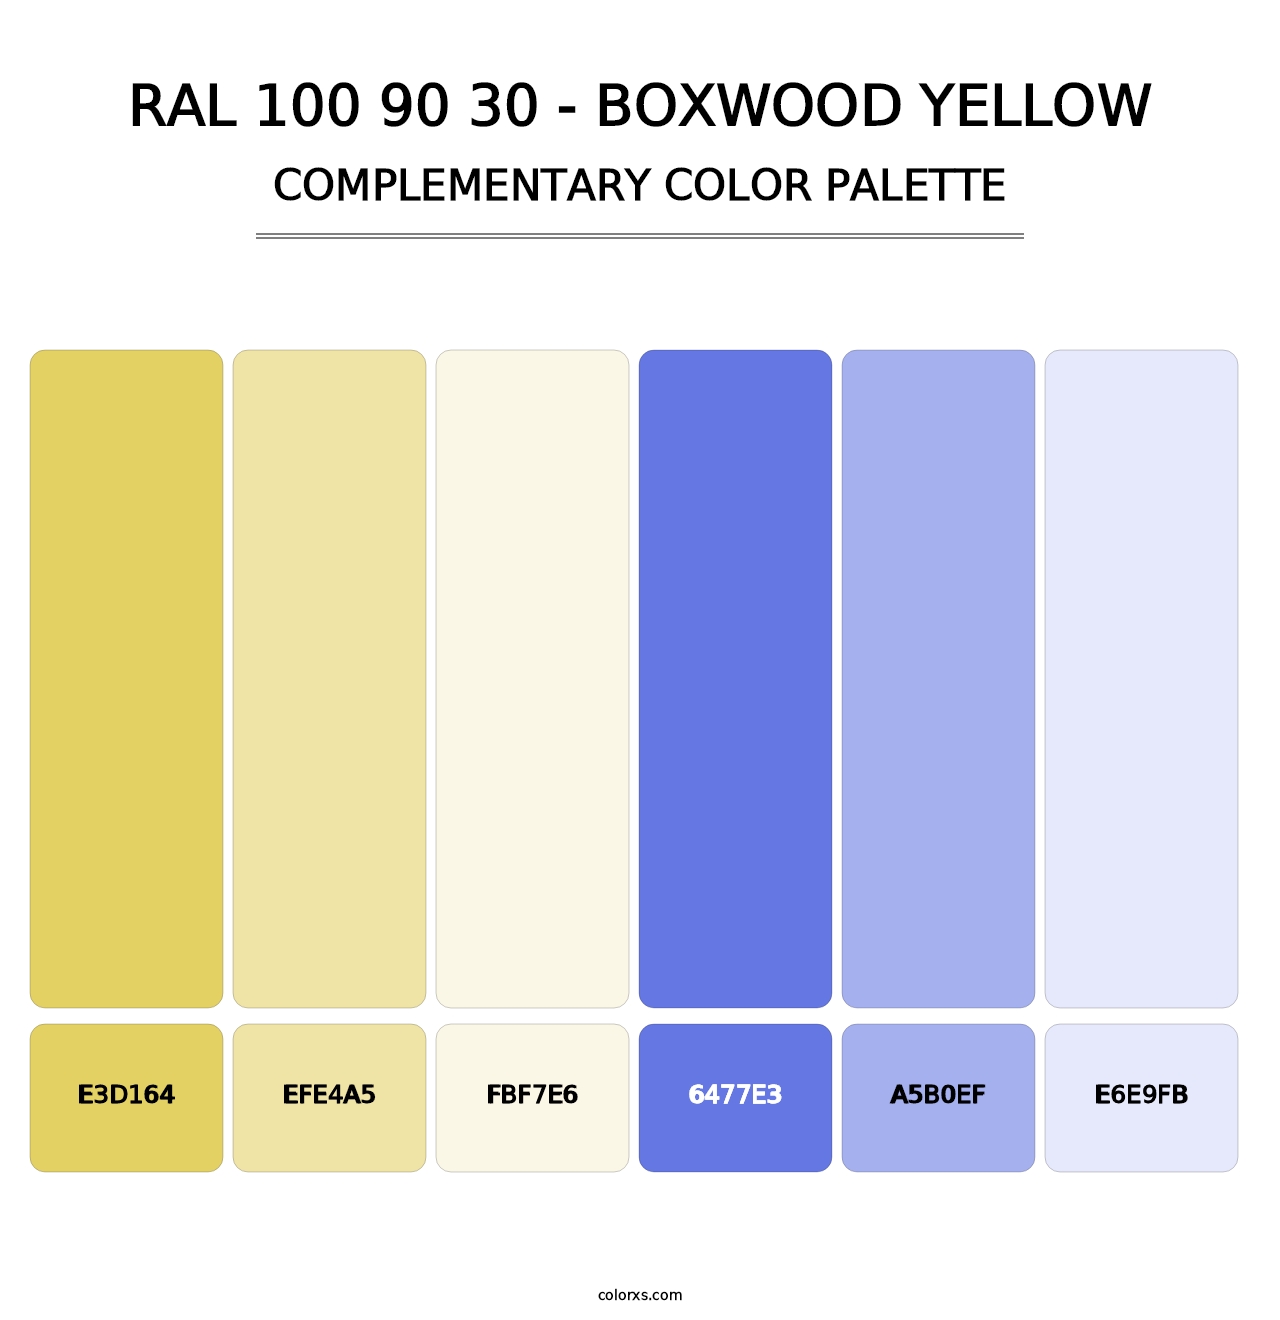 RAL 100 90 30 - Boxwood Yellow - Complementary Color Palette